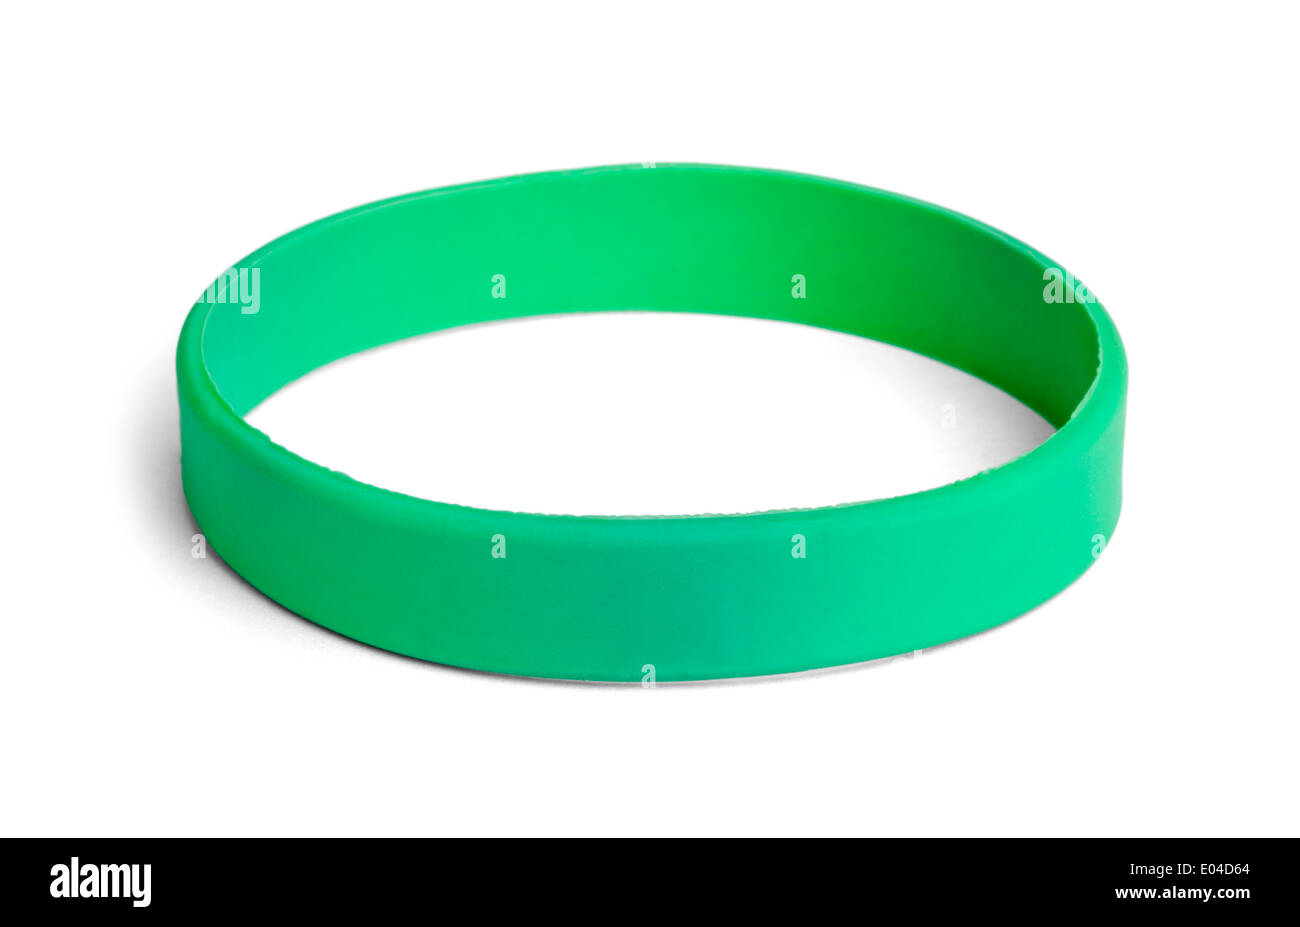 Blank rubber plastic stretch green bracelet isolated on white background. Stock Photo